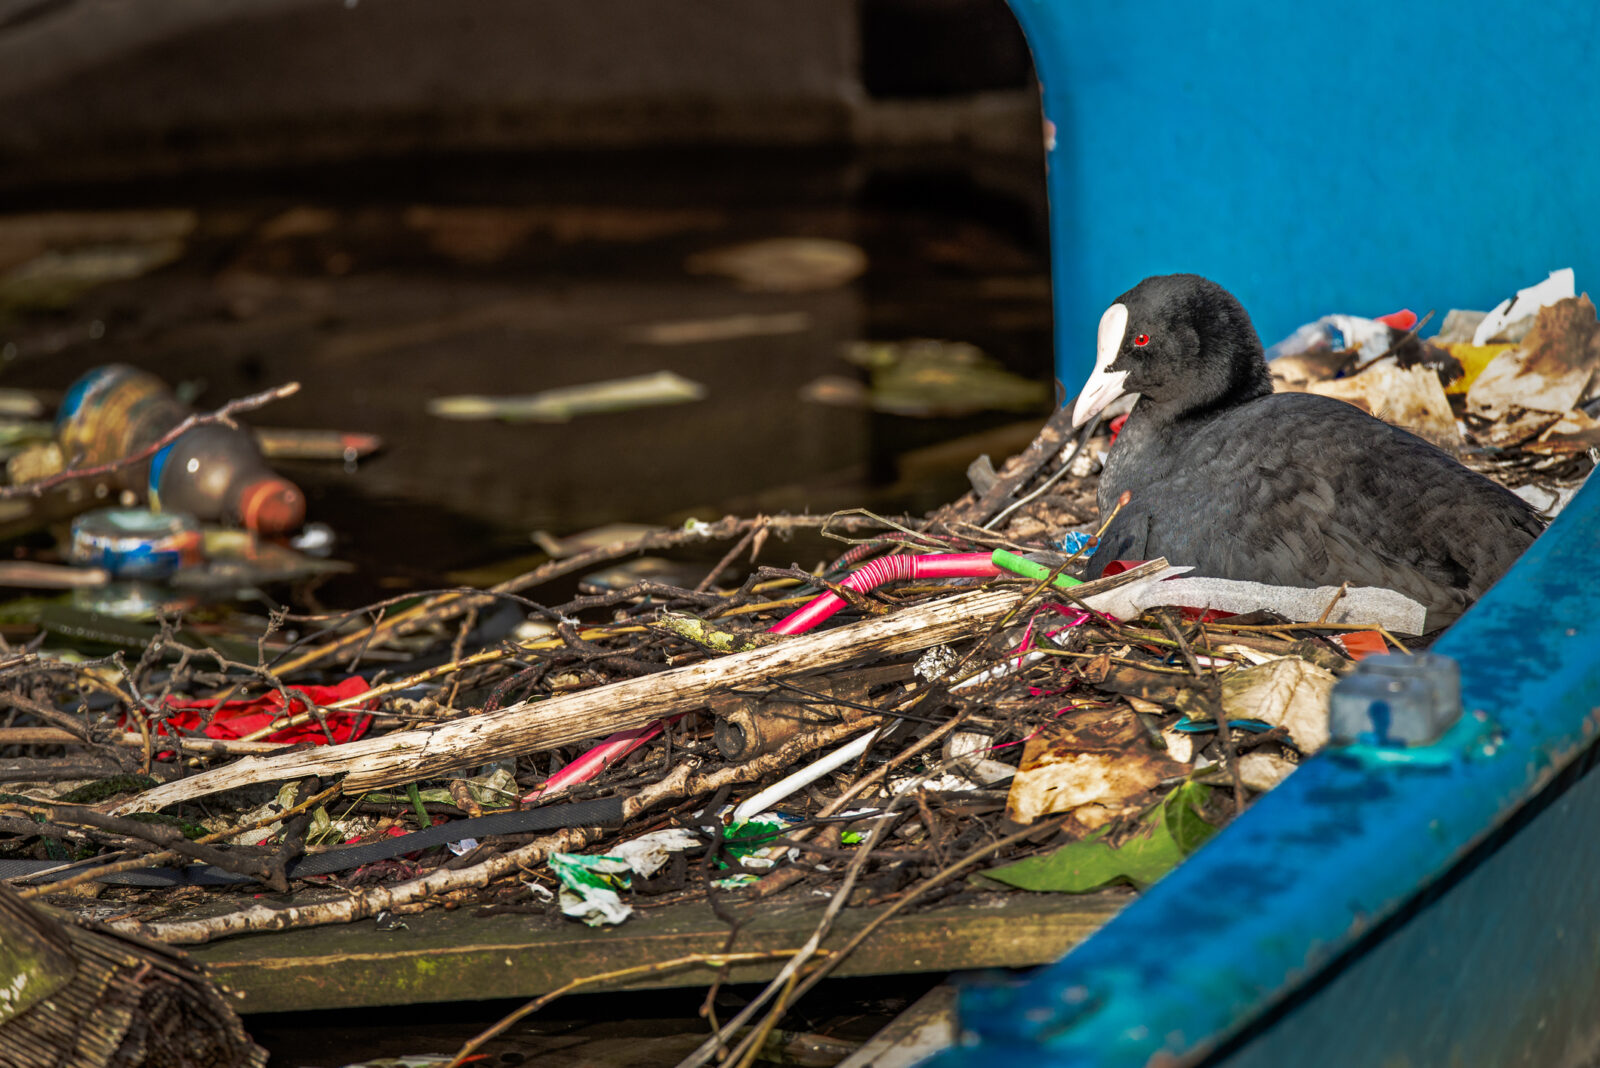 A picture of a Eurasion Coot sitting on a nest that includes plastic trash such as straws, for an LCA post on Skip the Straw Day.